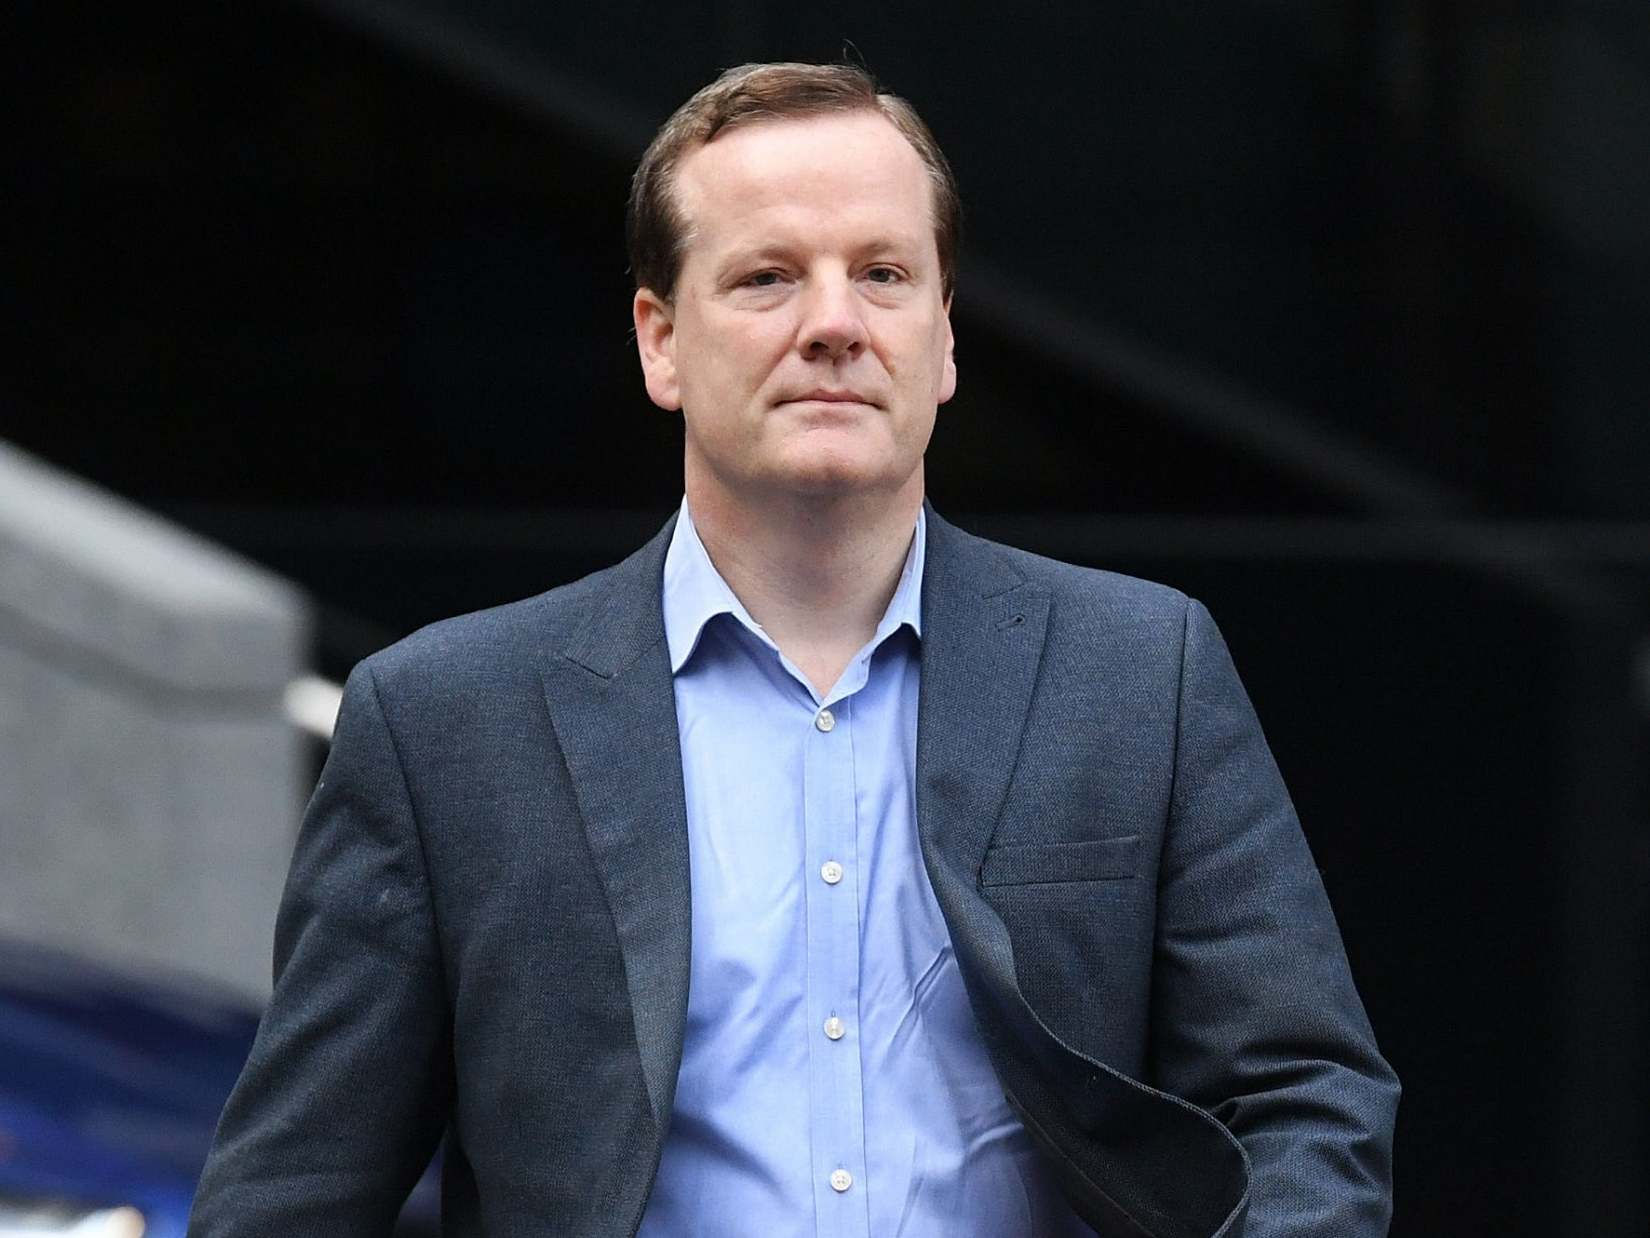 Charlie Elphicke was convicted of three counts of sexual assault